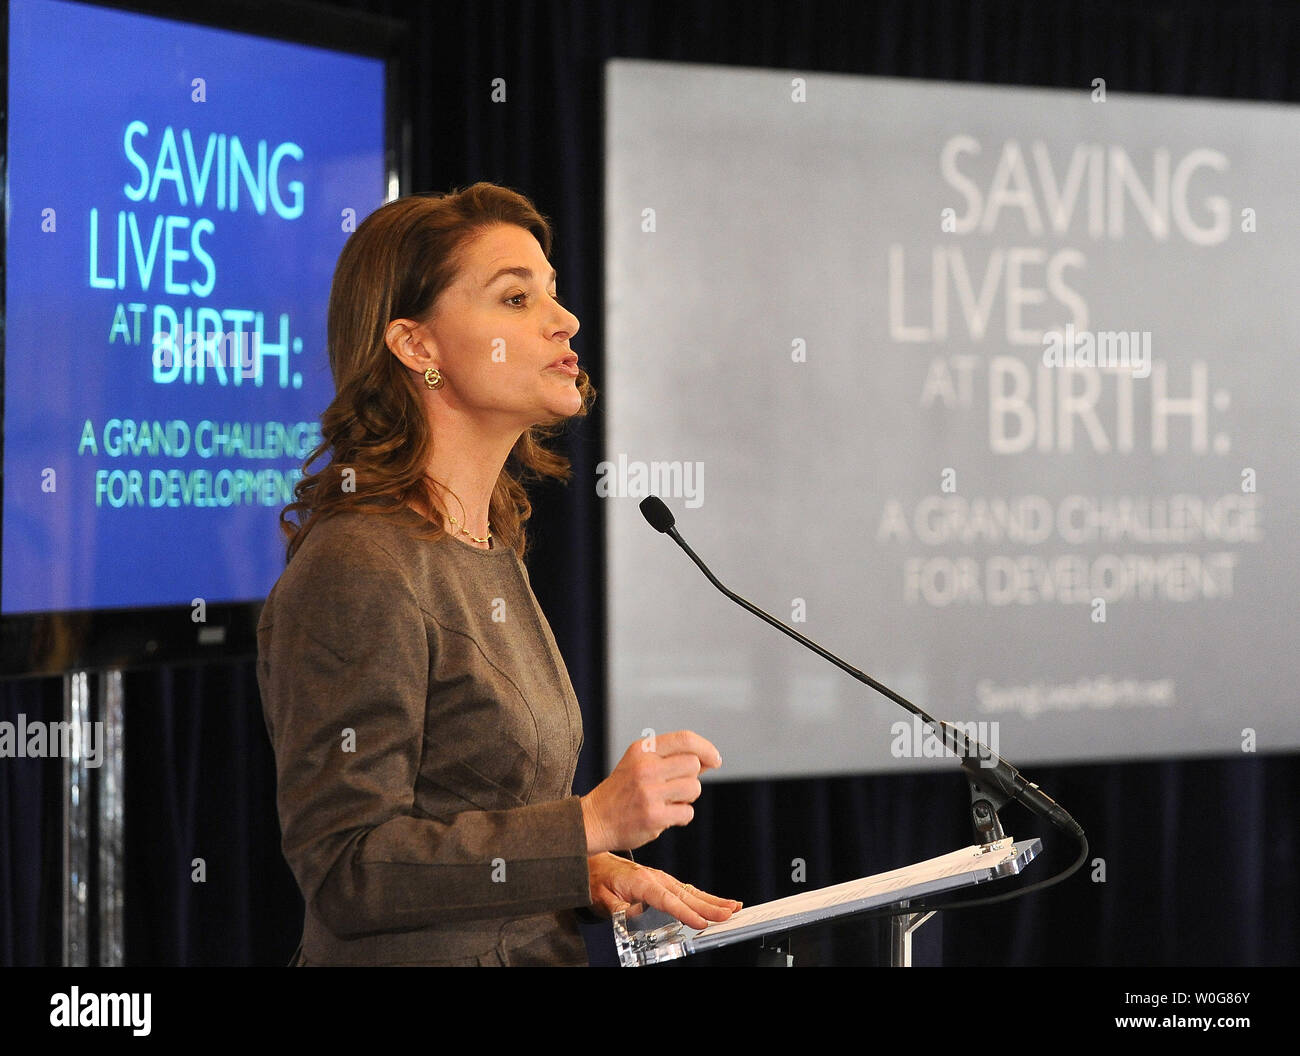 Melinda Gates of the Bill and Melinda Gates Foundation speaks during a U.S. Agency for International Development (USAID) event highlighting maternal and child health initiatives in Washington on March 9, 2011.    UPI/Roger L. Wollenberg. Stock Photo